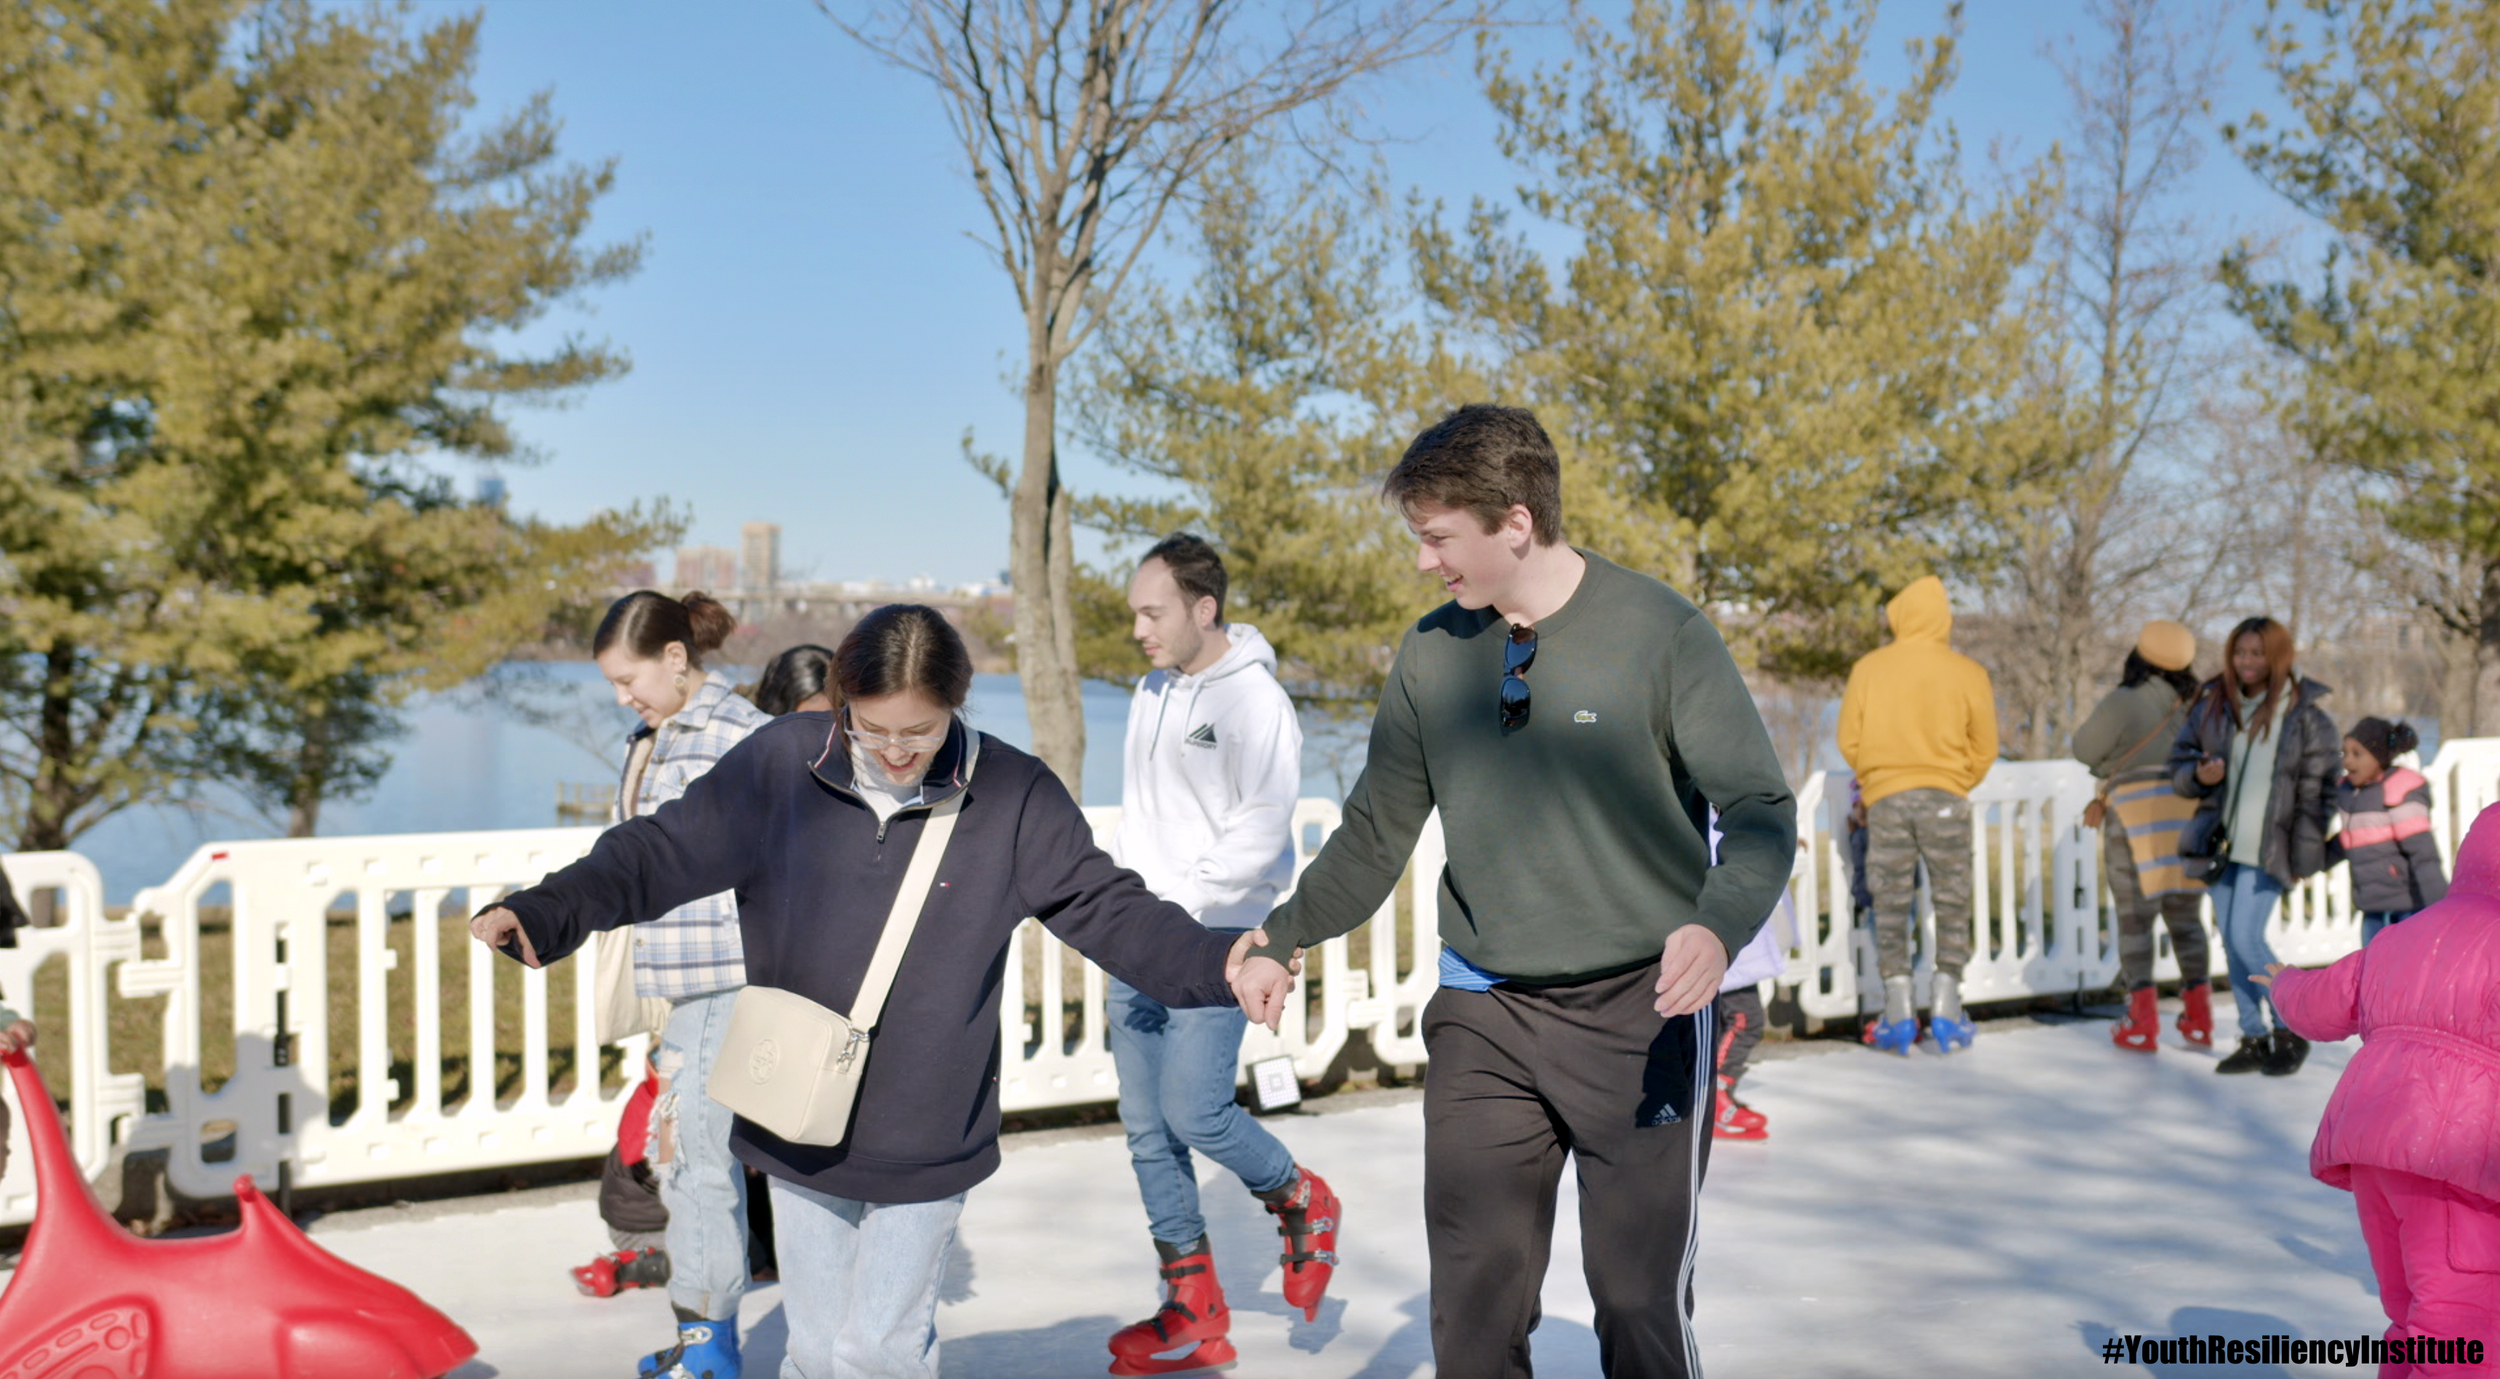  People are ice-skating and holding hands on the ice-rink with a view of the Middle Branch waterfront in the background. 